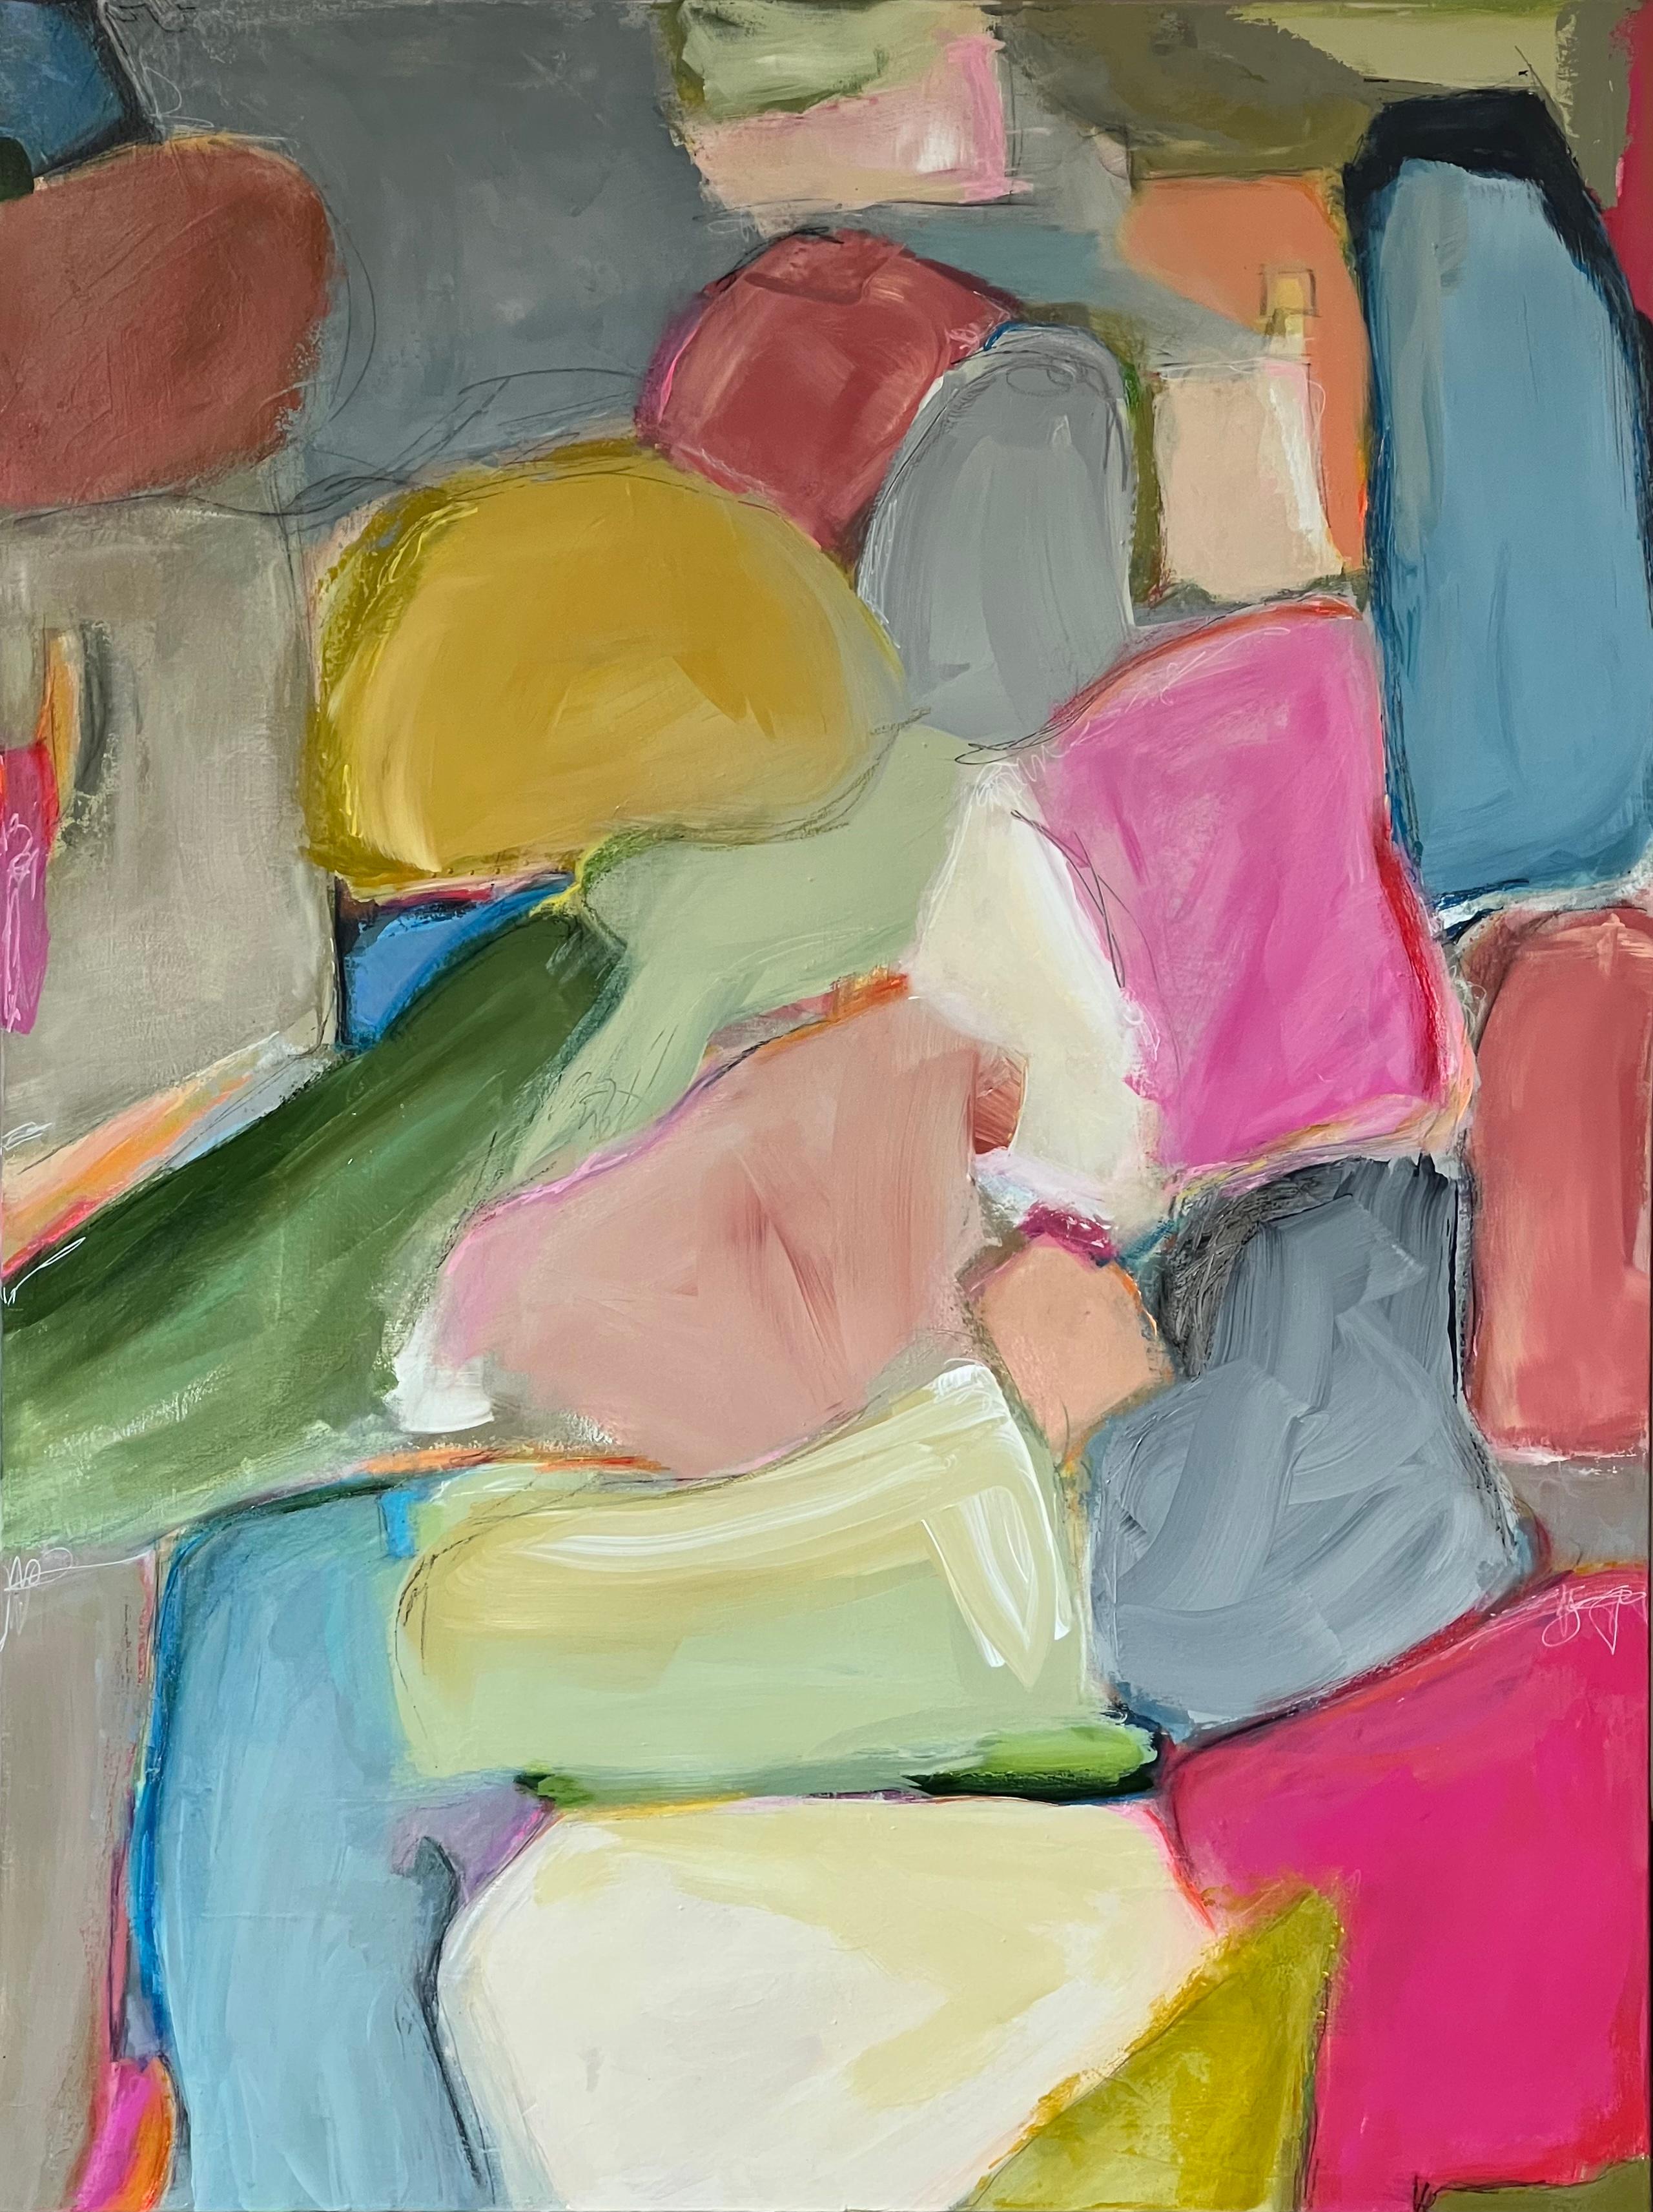 Dreaming About You (Abstract, Blues, Green, Gold, Yellow, Pink) - Abstract Expressionist Painting by Kelley Carman